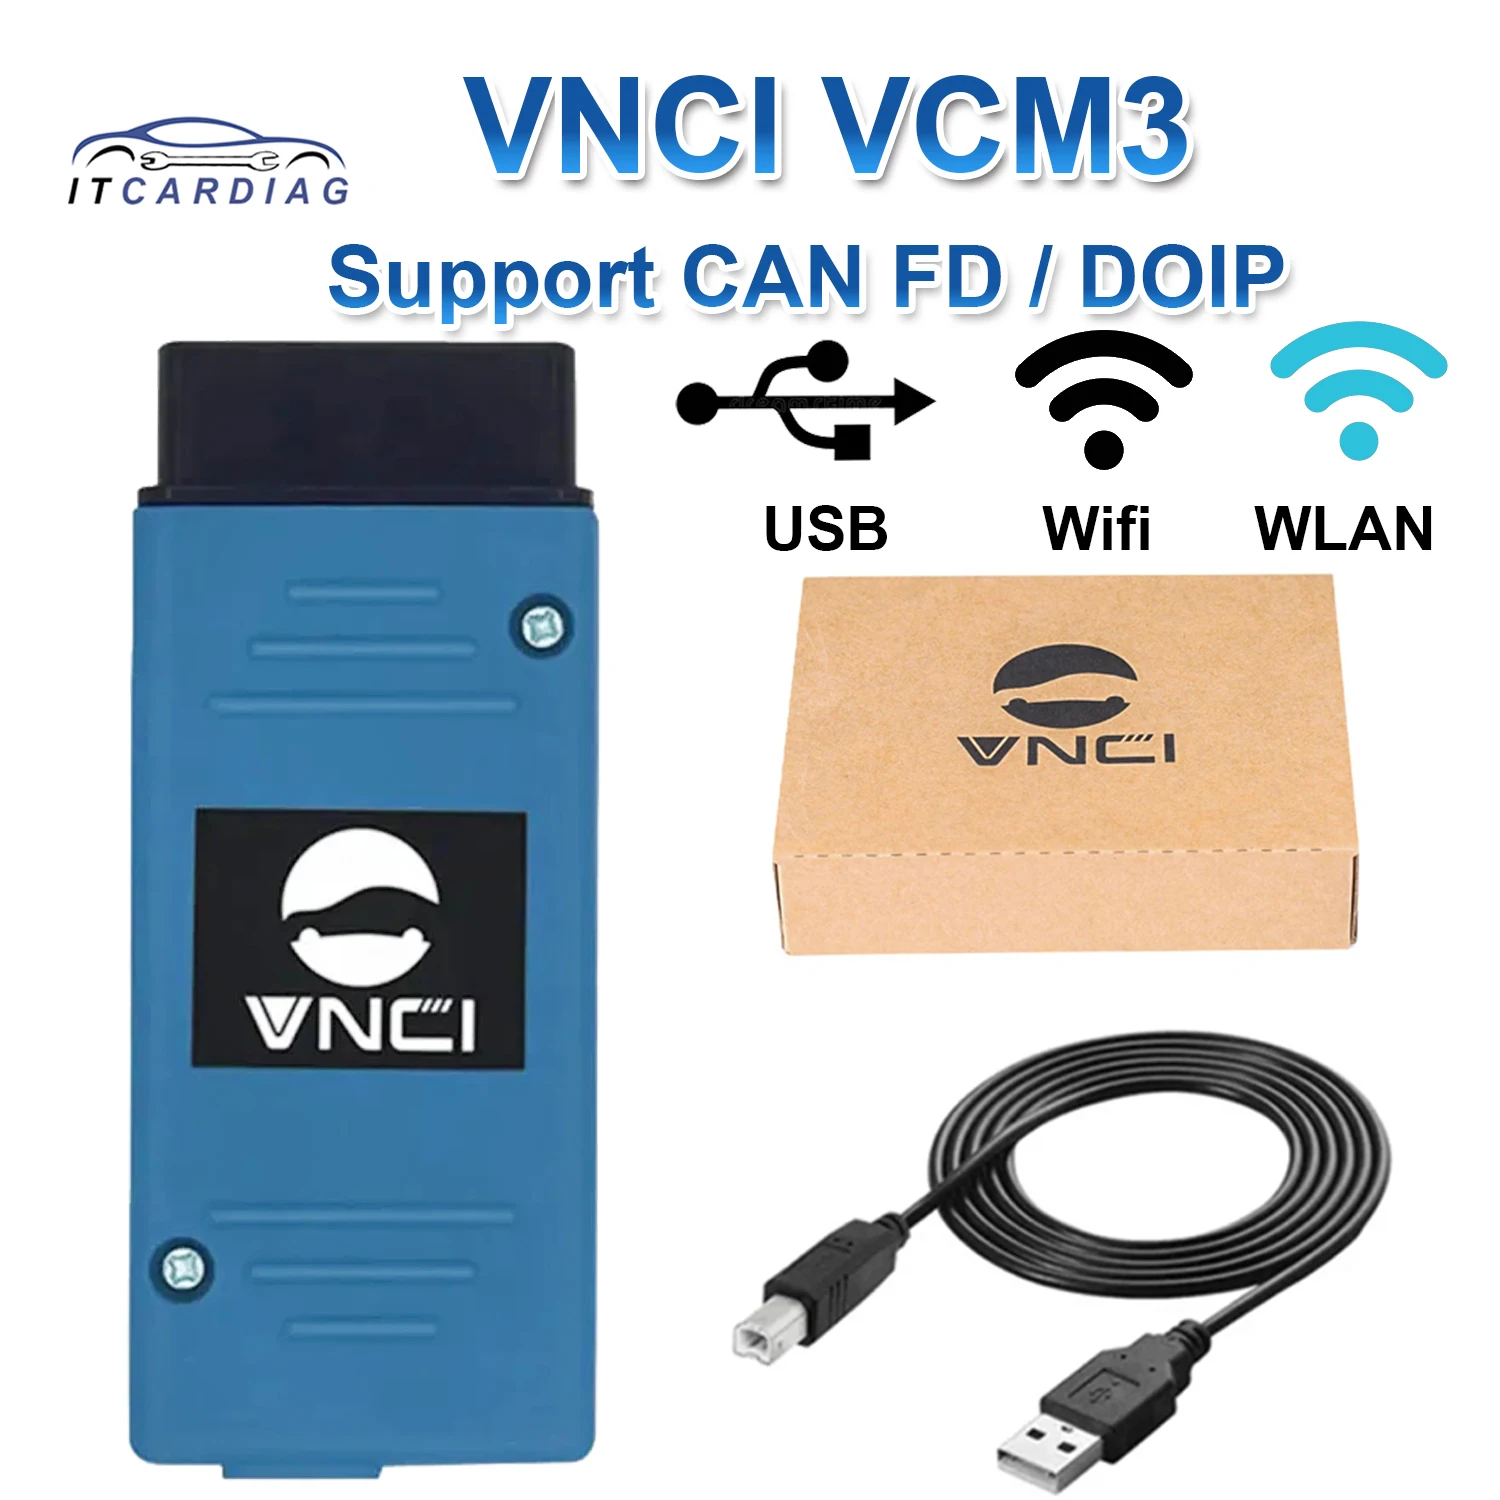 

VNCI VCM3 Car Diagnostic Scanner Supports CAN FD DoIP with USB WIFI LAN connection for for Ford MDI2 from 1996 to 2023 Years